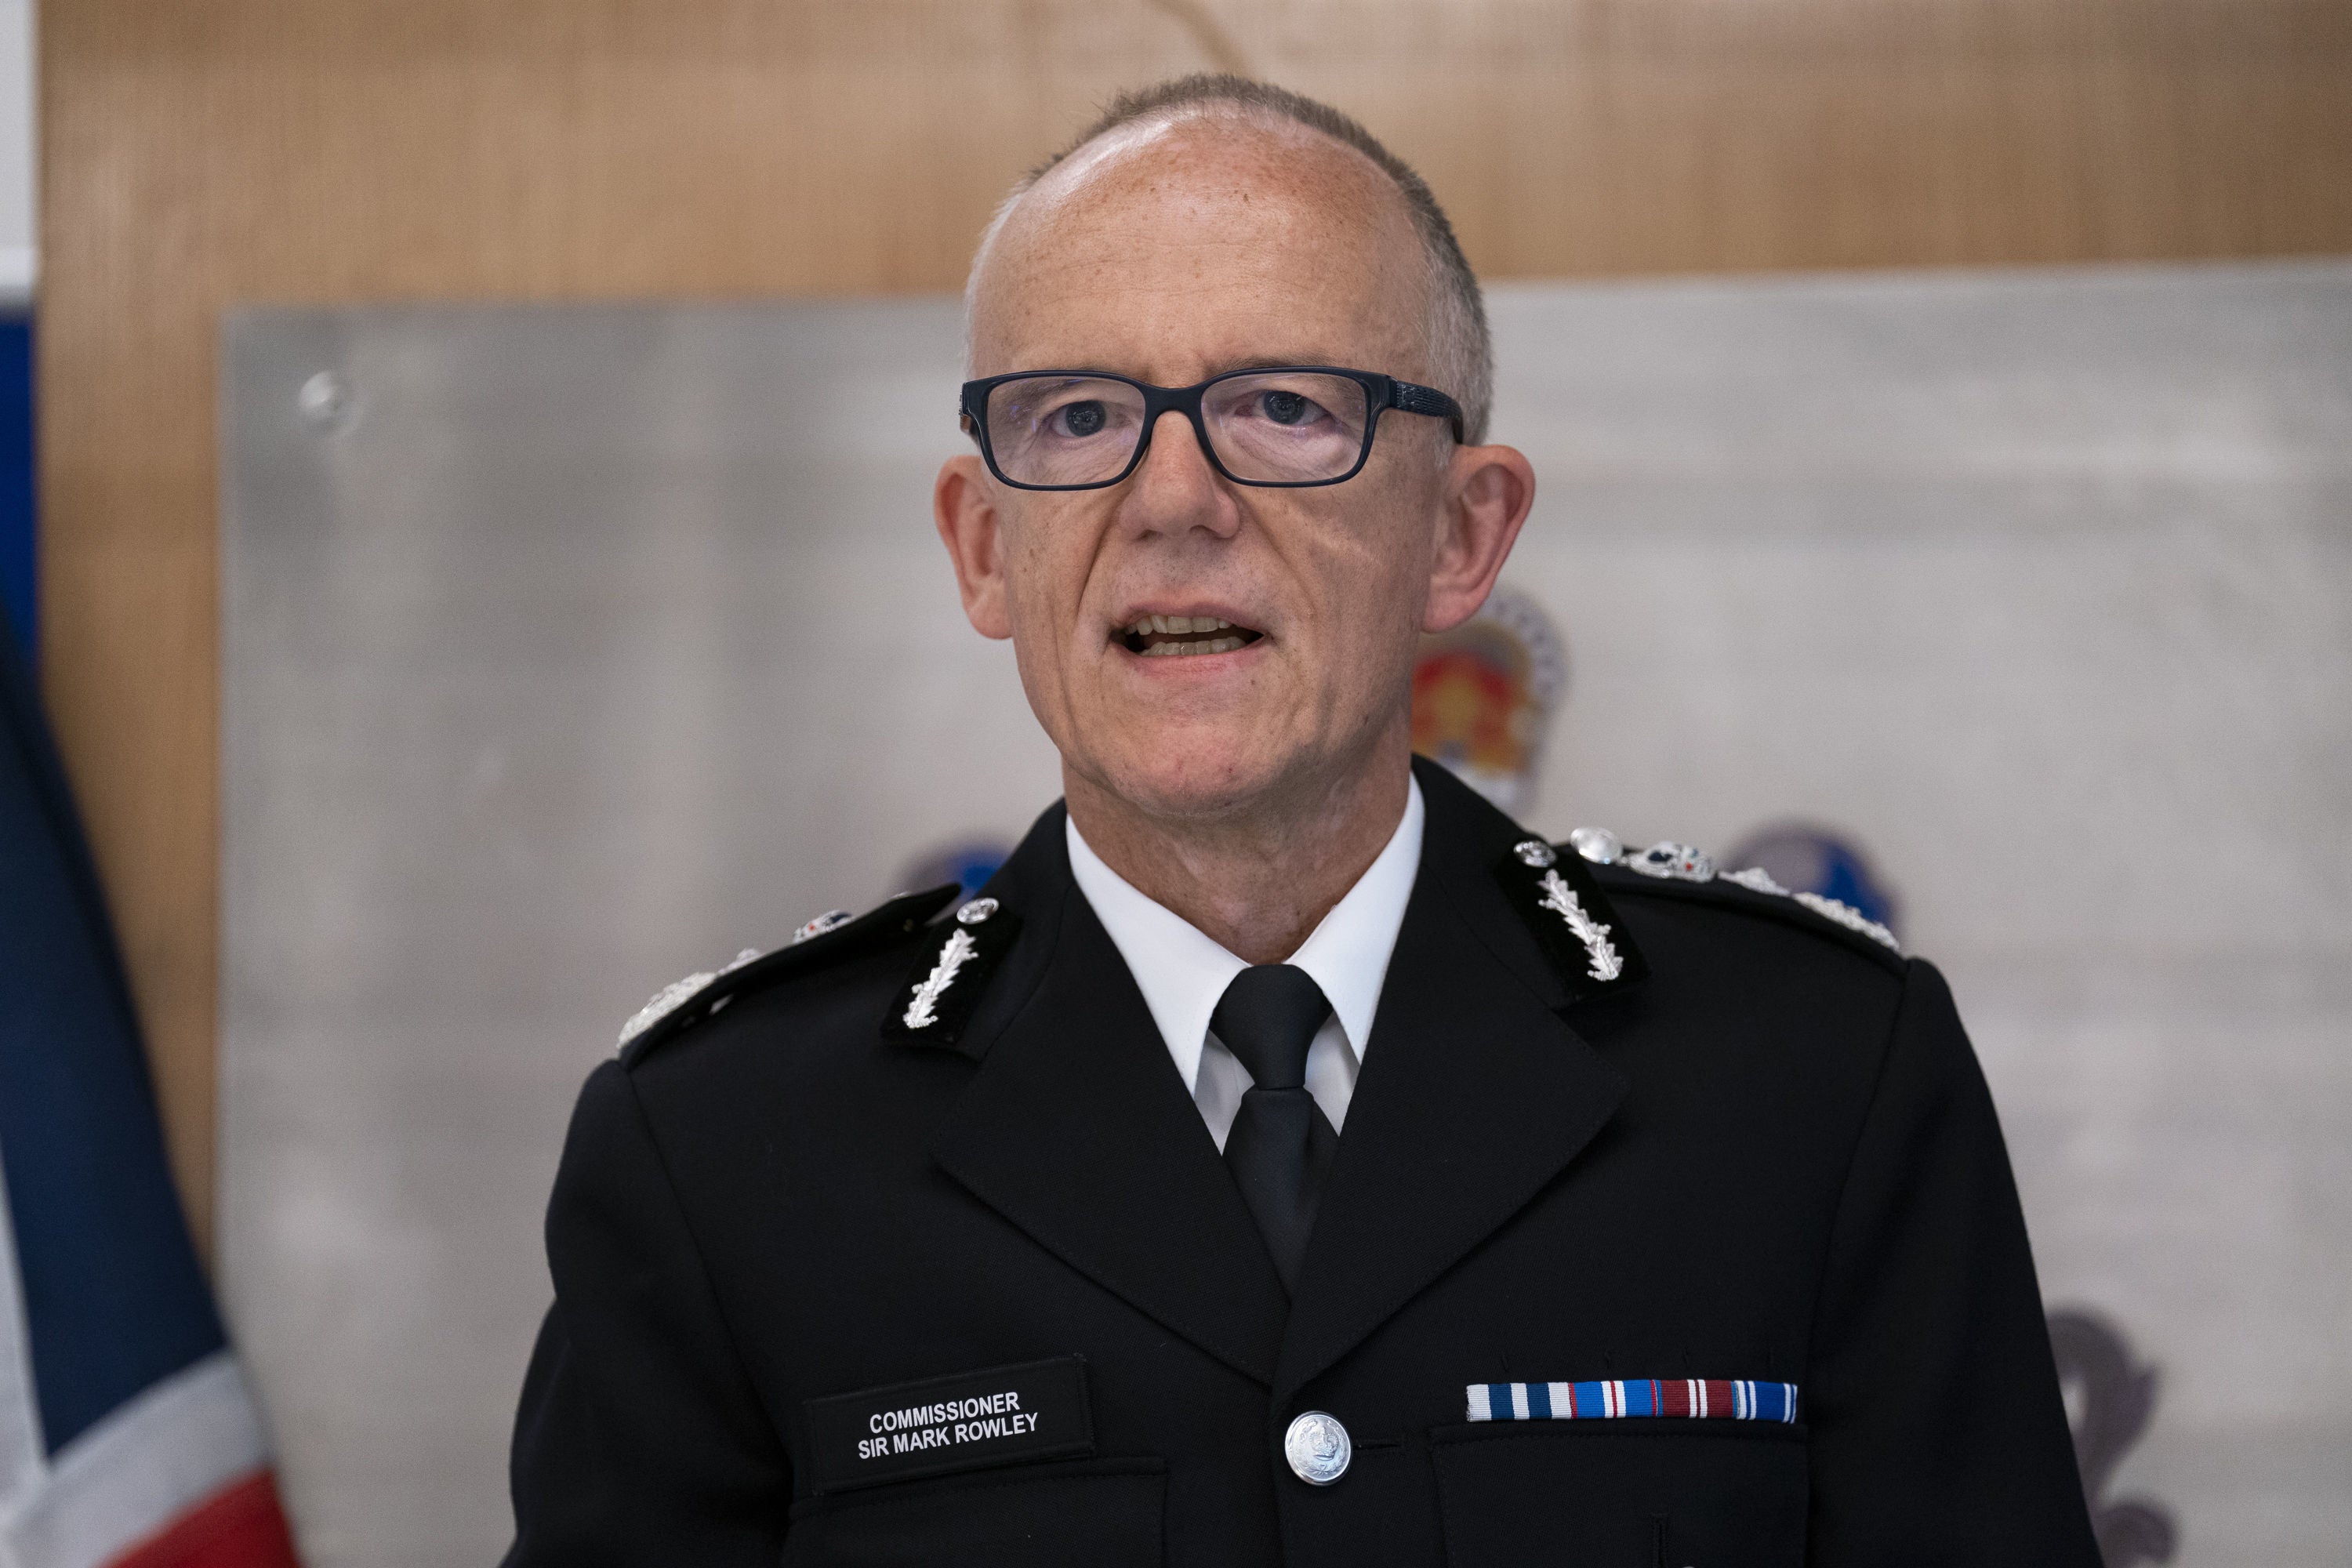 The case of David Carrick illustrates a culture of complacency in forces such as the Met Police, now led by new Commissioner Mark Rowley